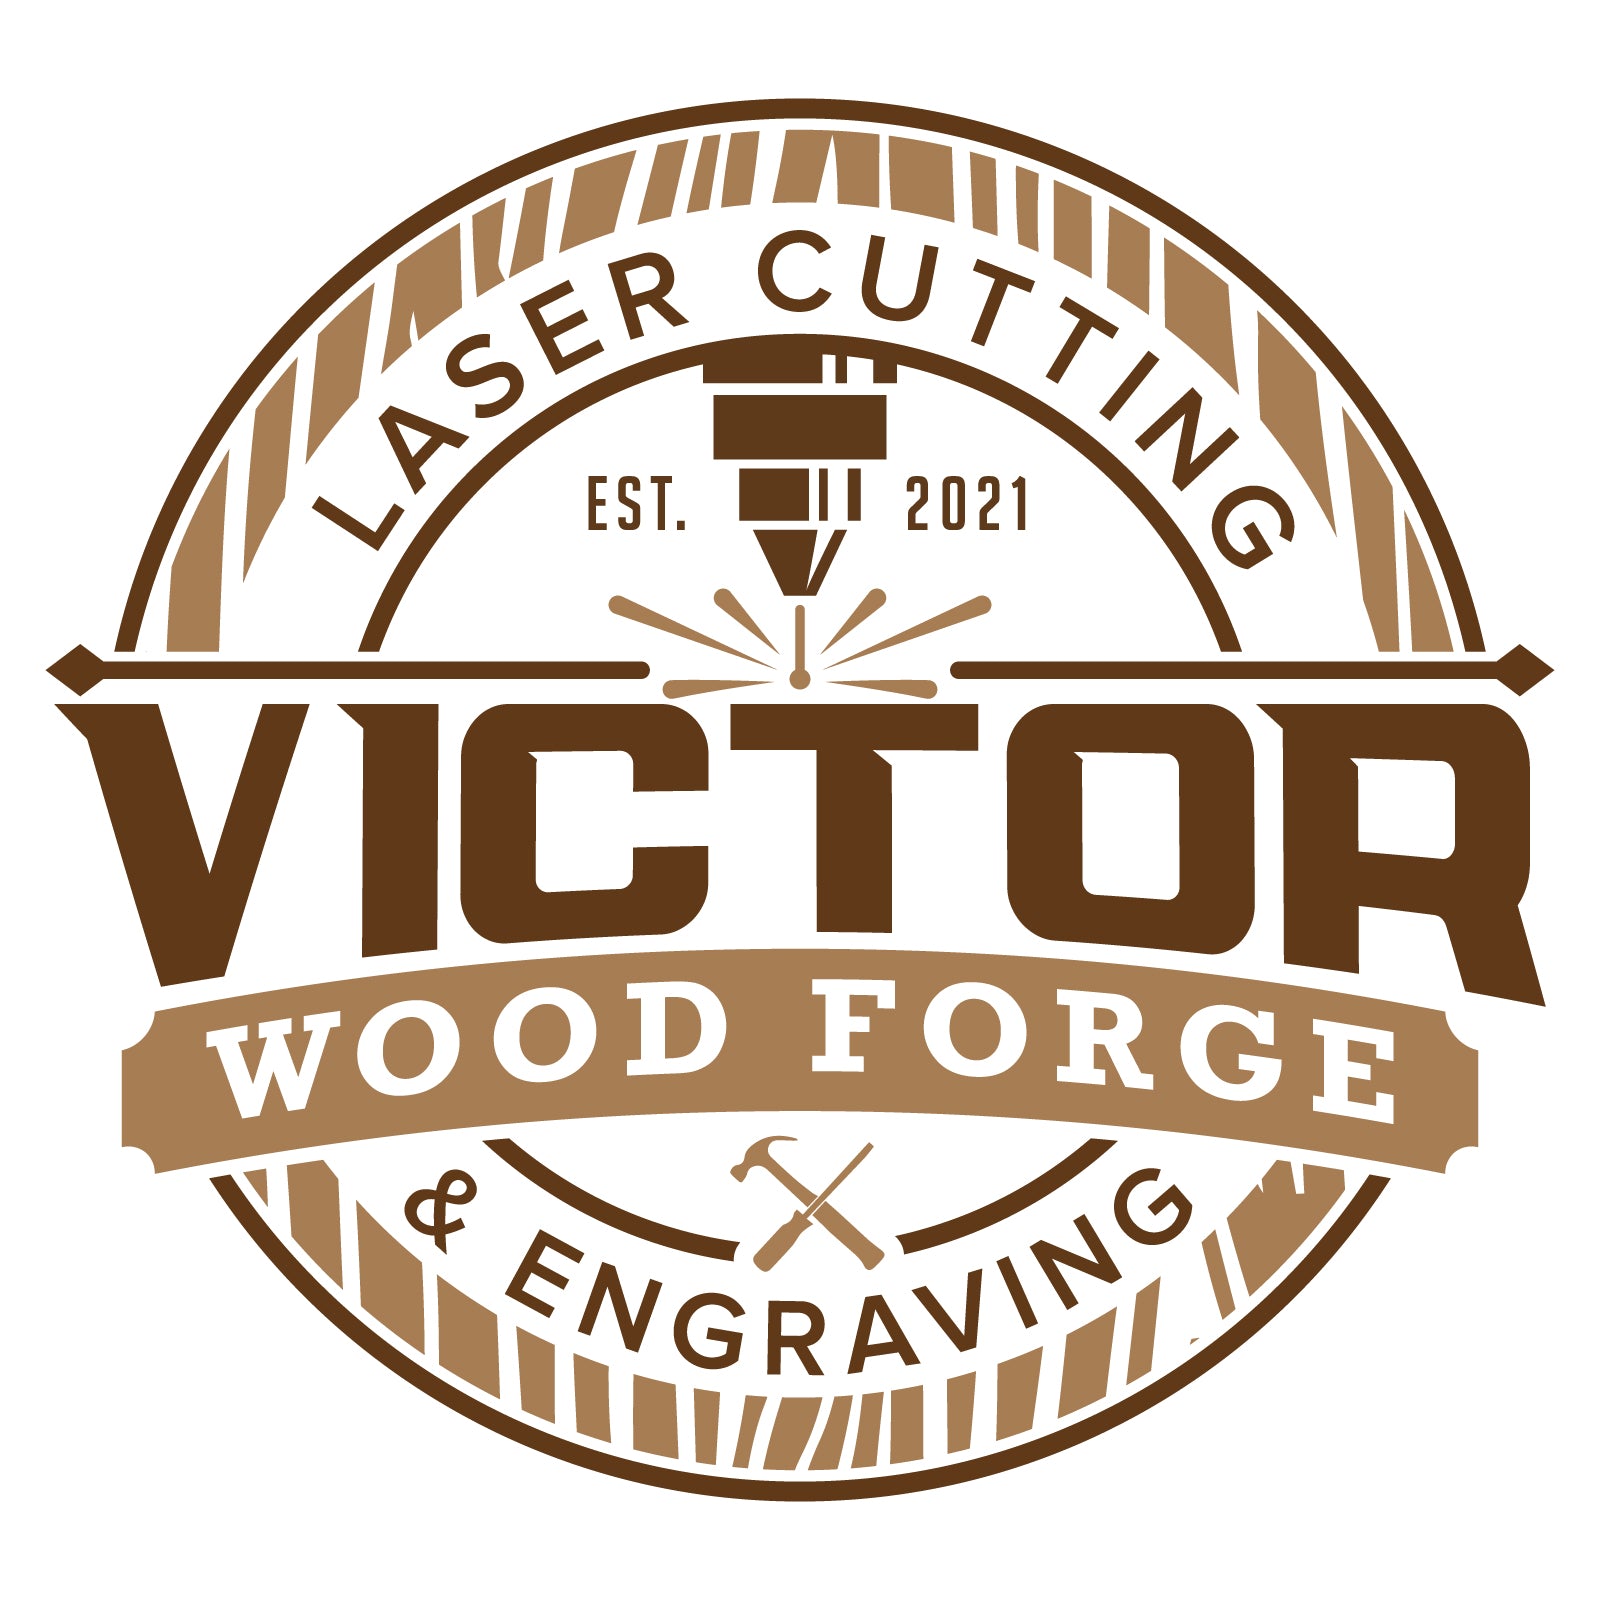 Victor Wood Forge - Custom Laser Cutting and Engraving